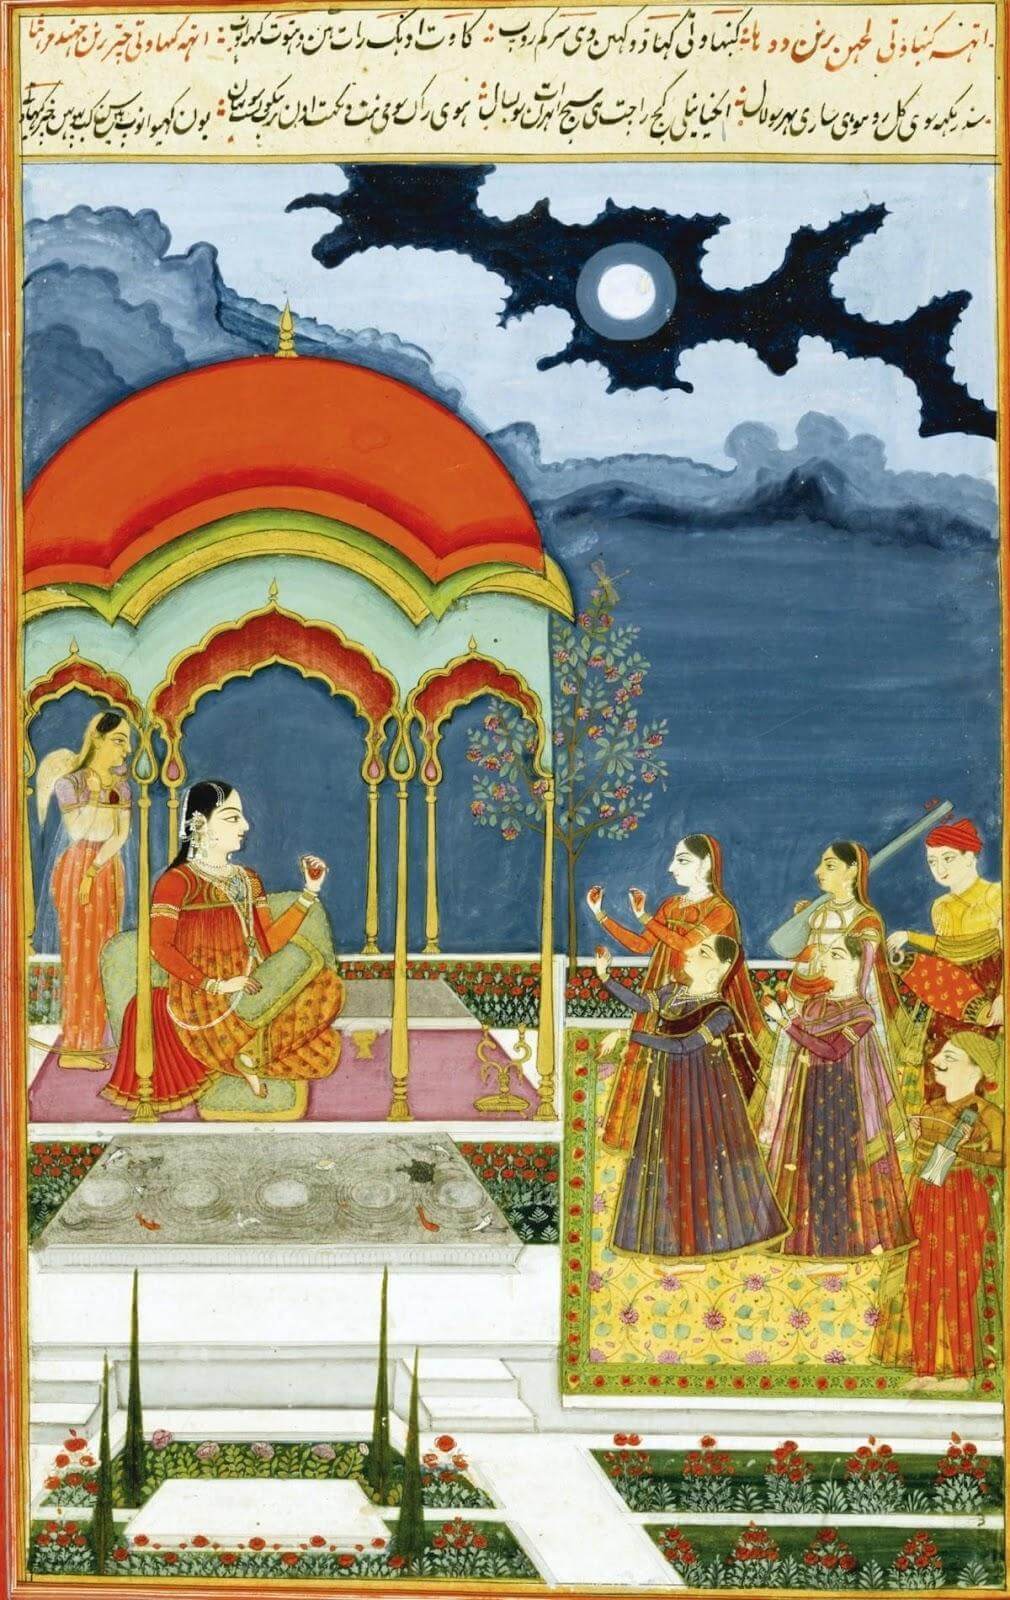 Figure 4: Loose folio depicting Khambavati Ragini, from a dispersed Rag Darshan manuscript. Opaque watercolour, gold, and ink on paper. Late eighteenth century. Sold at Sothebys, April 2013. https://www.sothebys.com/en/auctions/ecatalogue/2013/arts-of-the-islamic-world-l13220/lot.74.html.